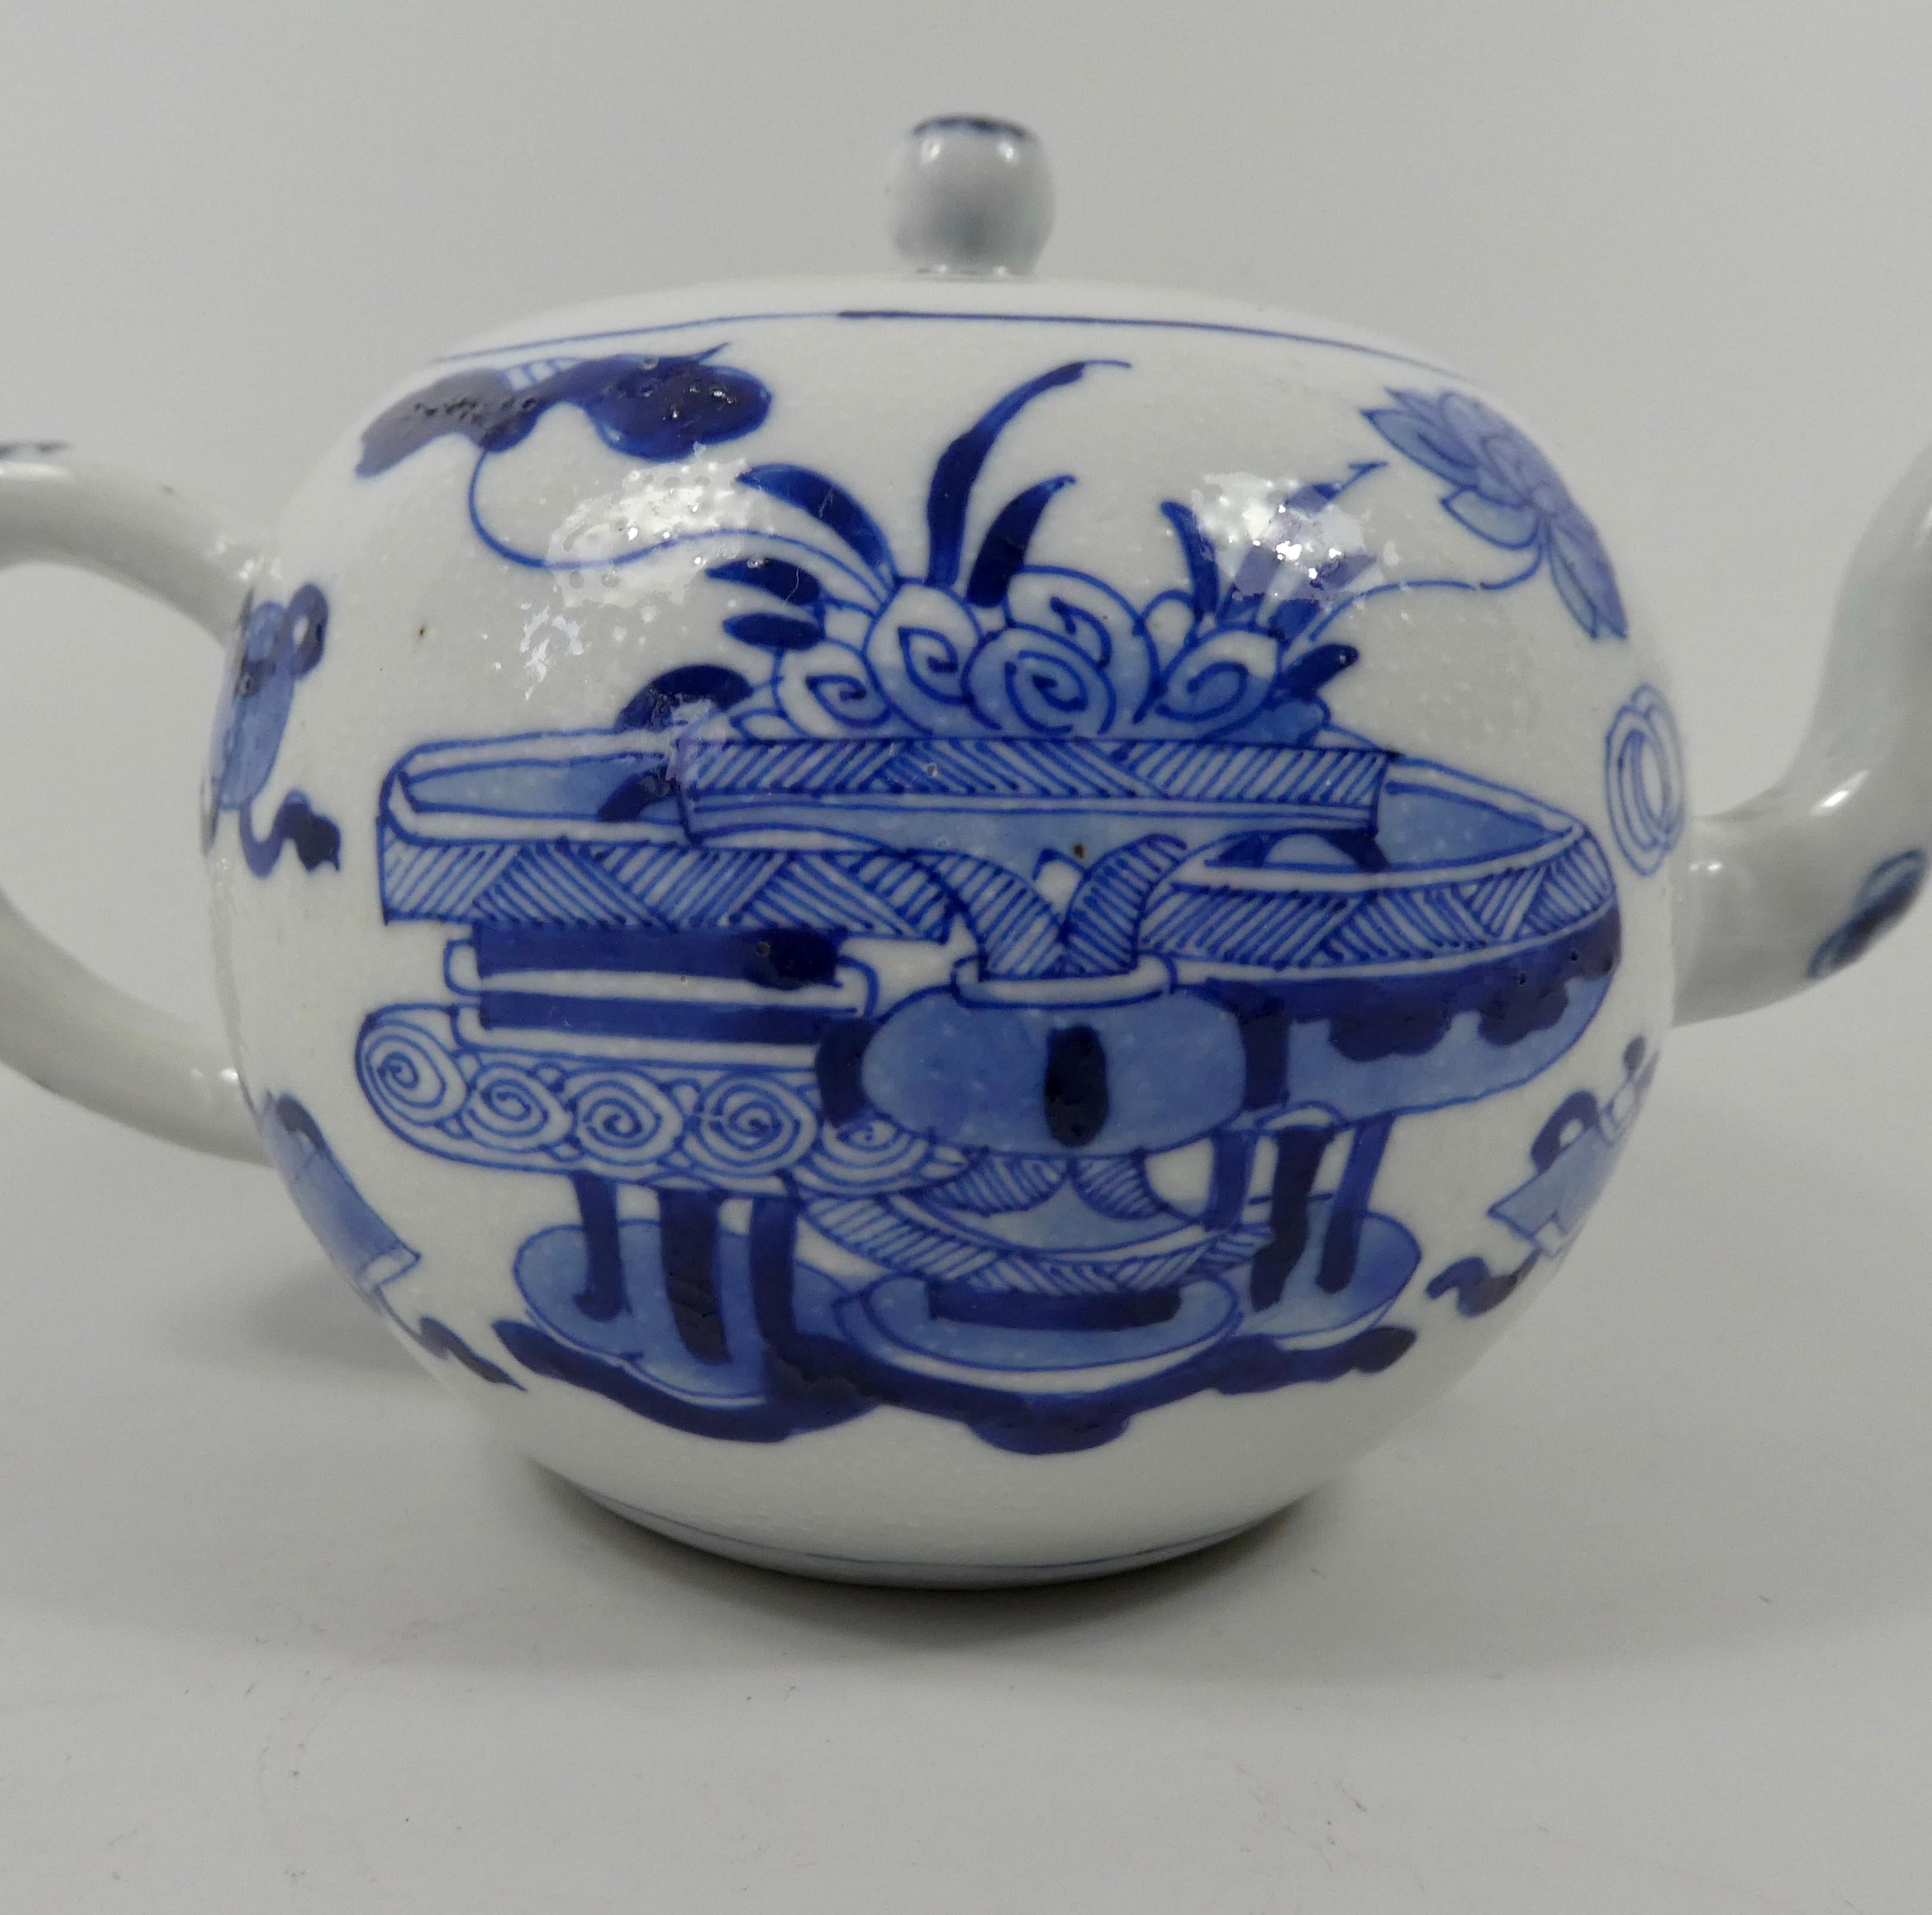 Chinese porcelain teapot, circa 1700, Kangxi Period. The lightly stippled ‘chicken skin’ body, well painted in underglaze blue, with panels of vases on stands, and Buddhistic symbols. The simple loop handle, and spout decorated with flowering